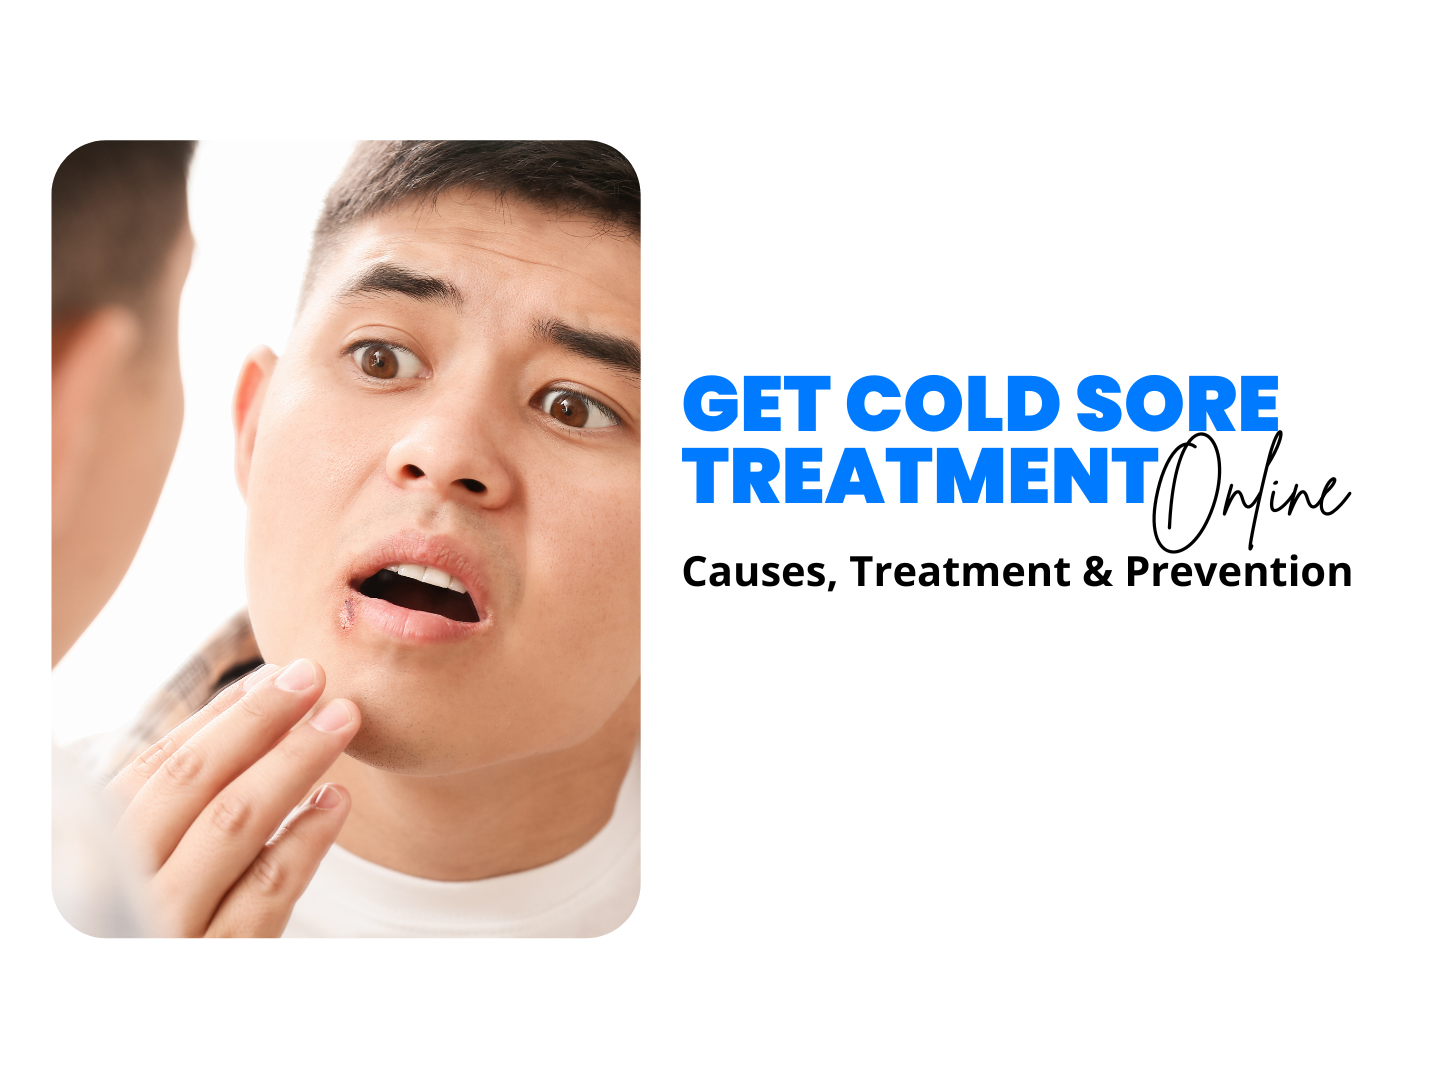 GET COLD SO
TREATMENT, nc

Causes, Treatment & Prevention